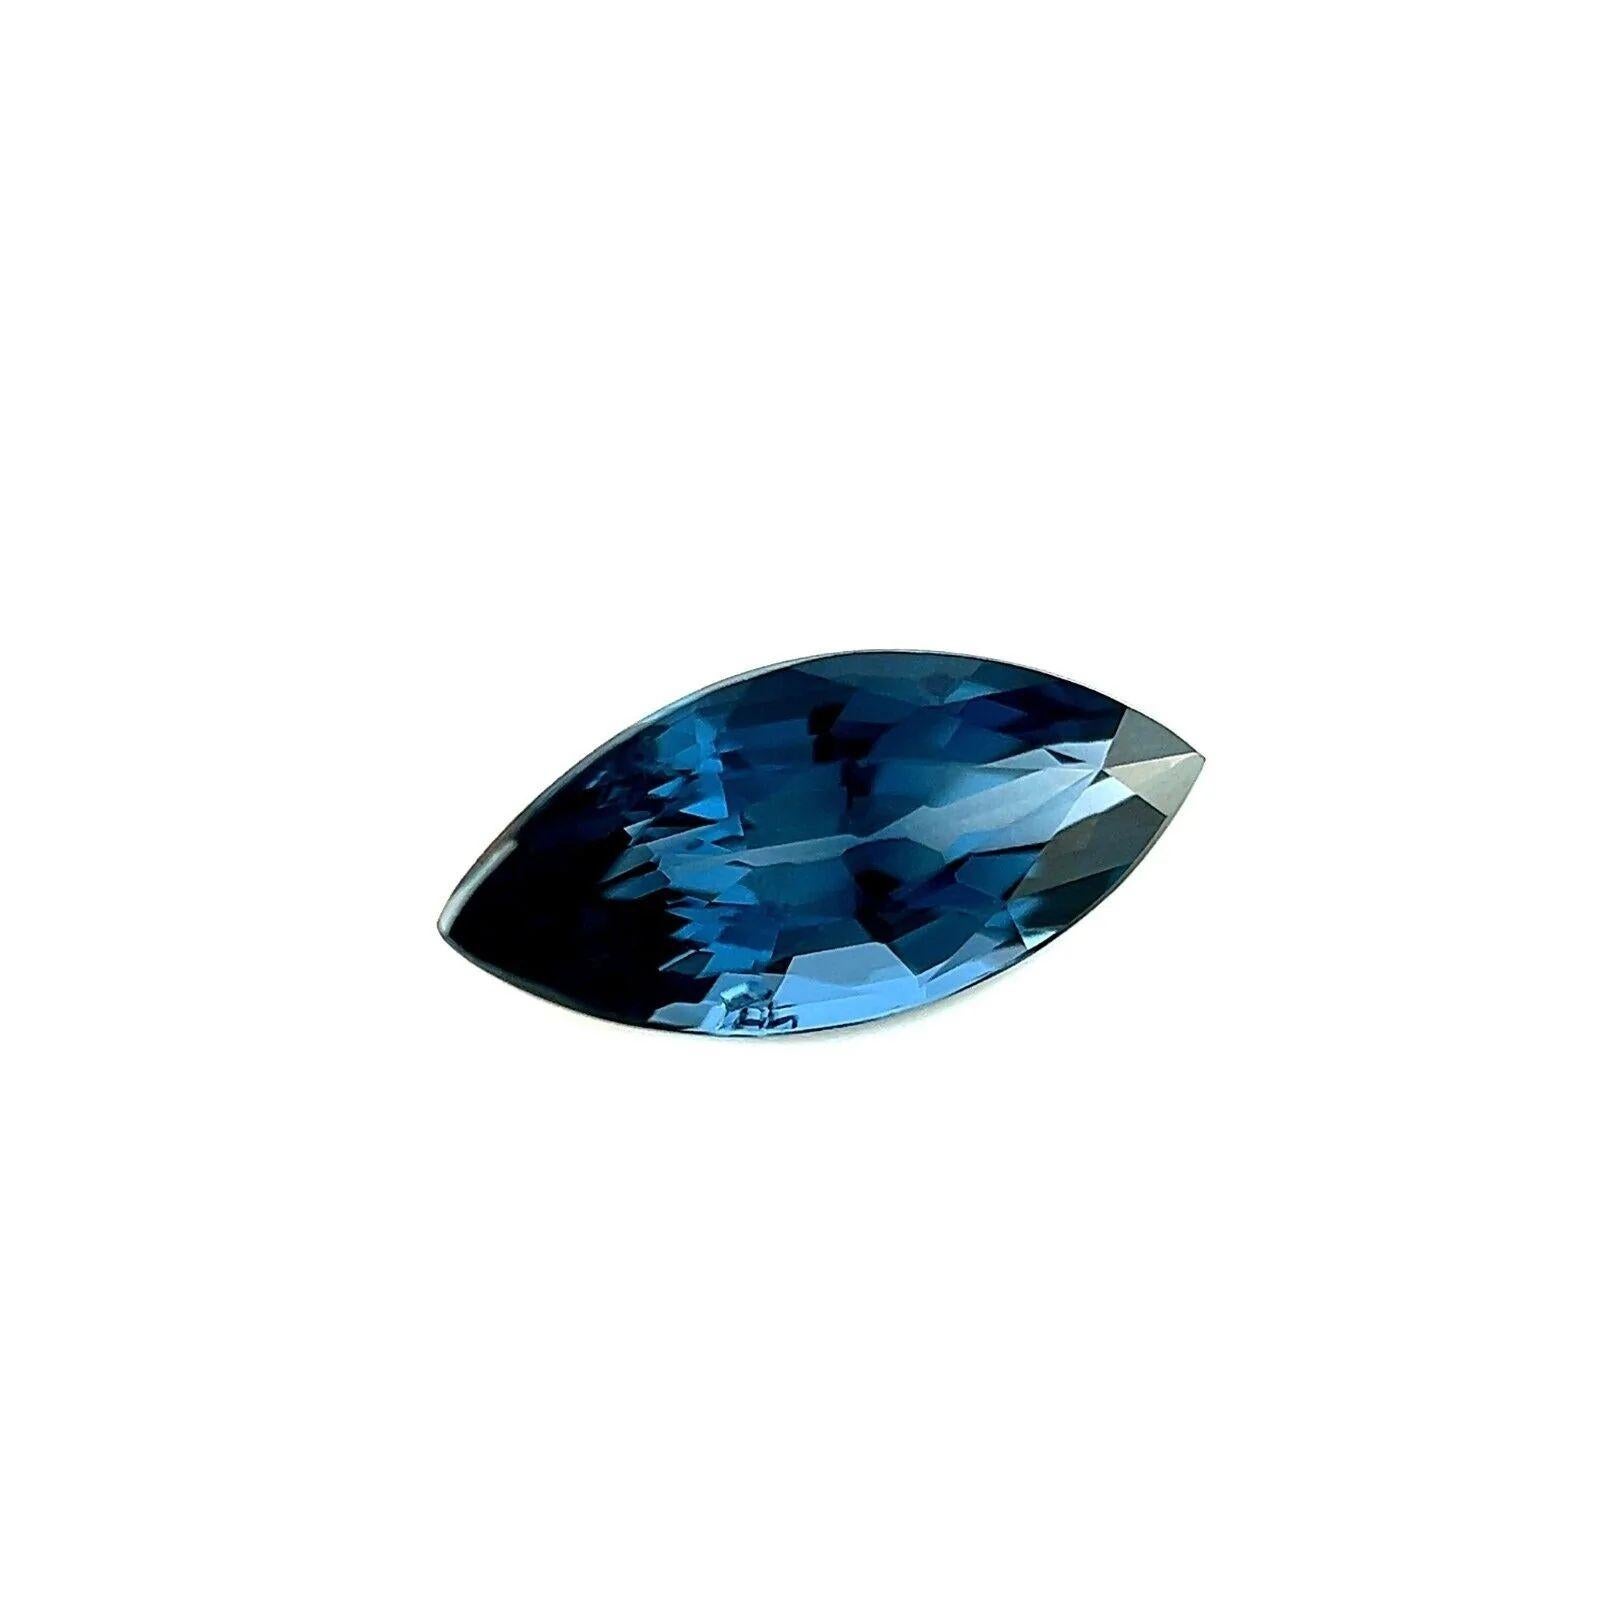 1.05ct Fine Blue Spinel Marquise Cut Rare Gemstone 9.6x4.4mm Loose Rare Gem

Fine Natural Vivid Blue Spinel Gemstone.
1.05 Carat spinel with a fine vivid blue colour and good clarity. Clean stone with only some small natural inclusions visible when